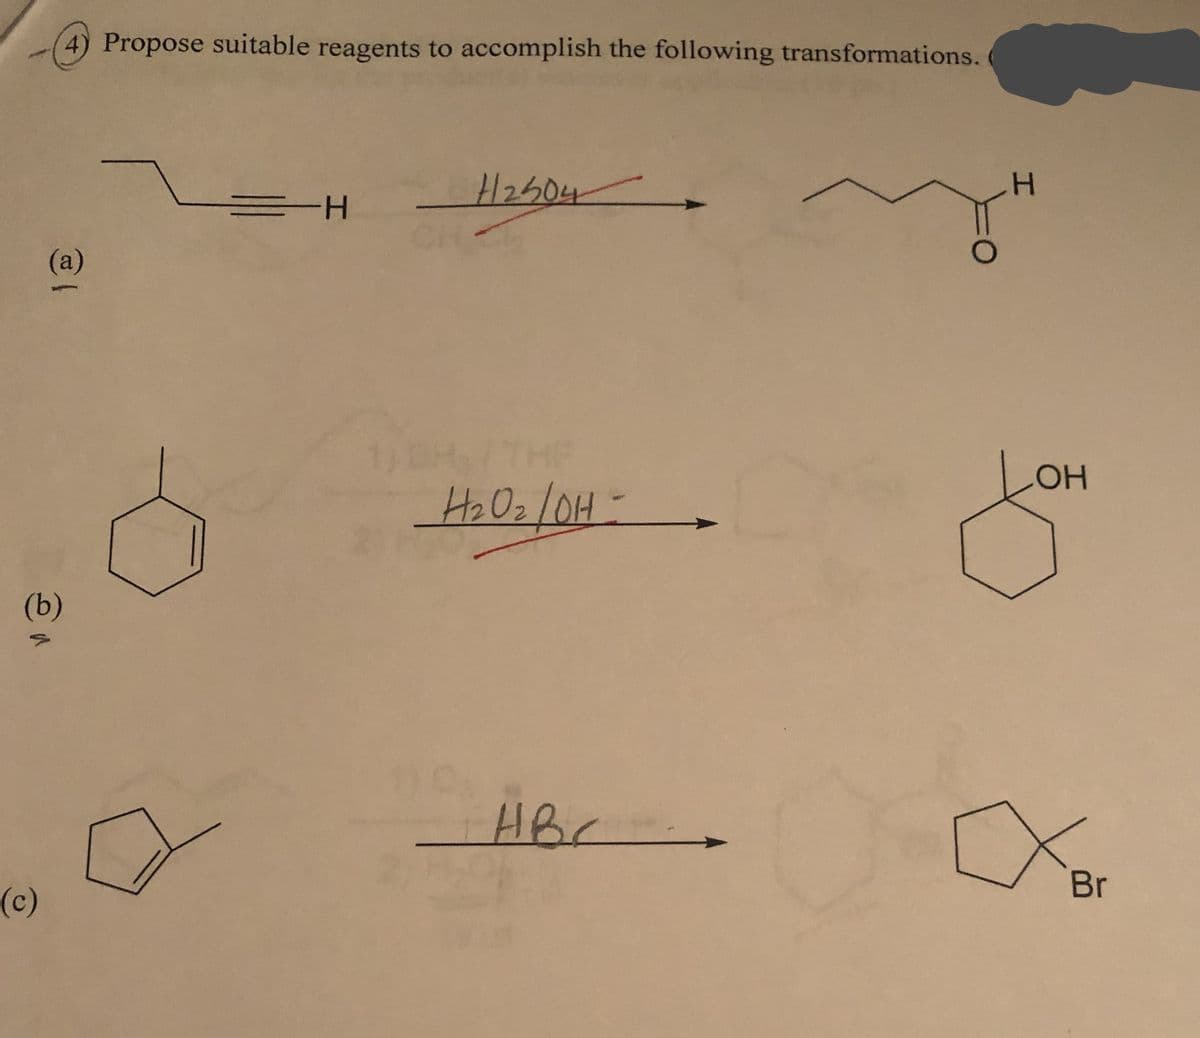 Propose suitable reagents to accomplish the following transformations. c
H2504
H-
(a)
1)DH/THE
LOH
(b)
HBC
Br
(c)
